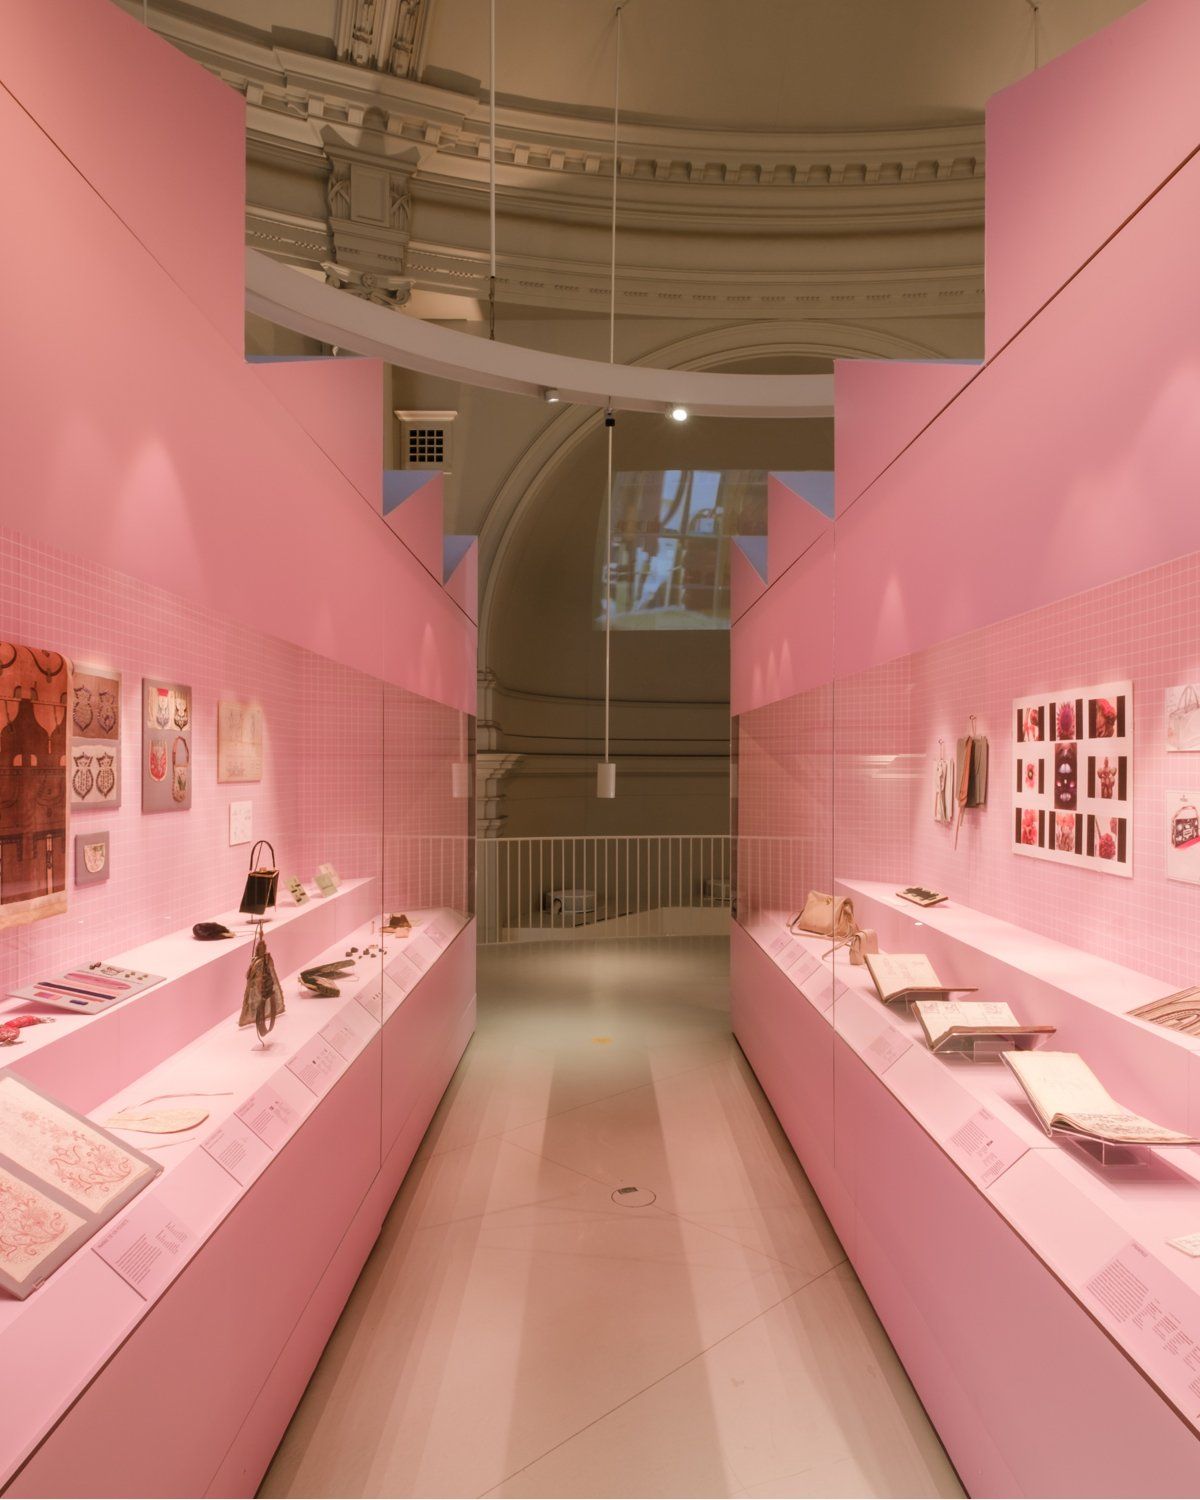 Exhibition room at the V&A museum